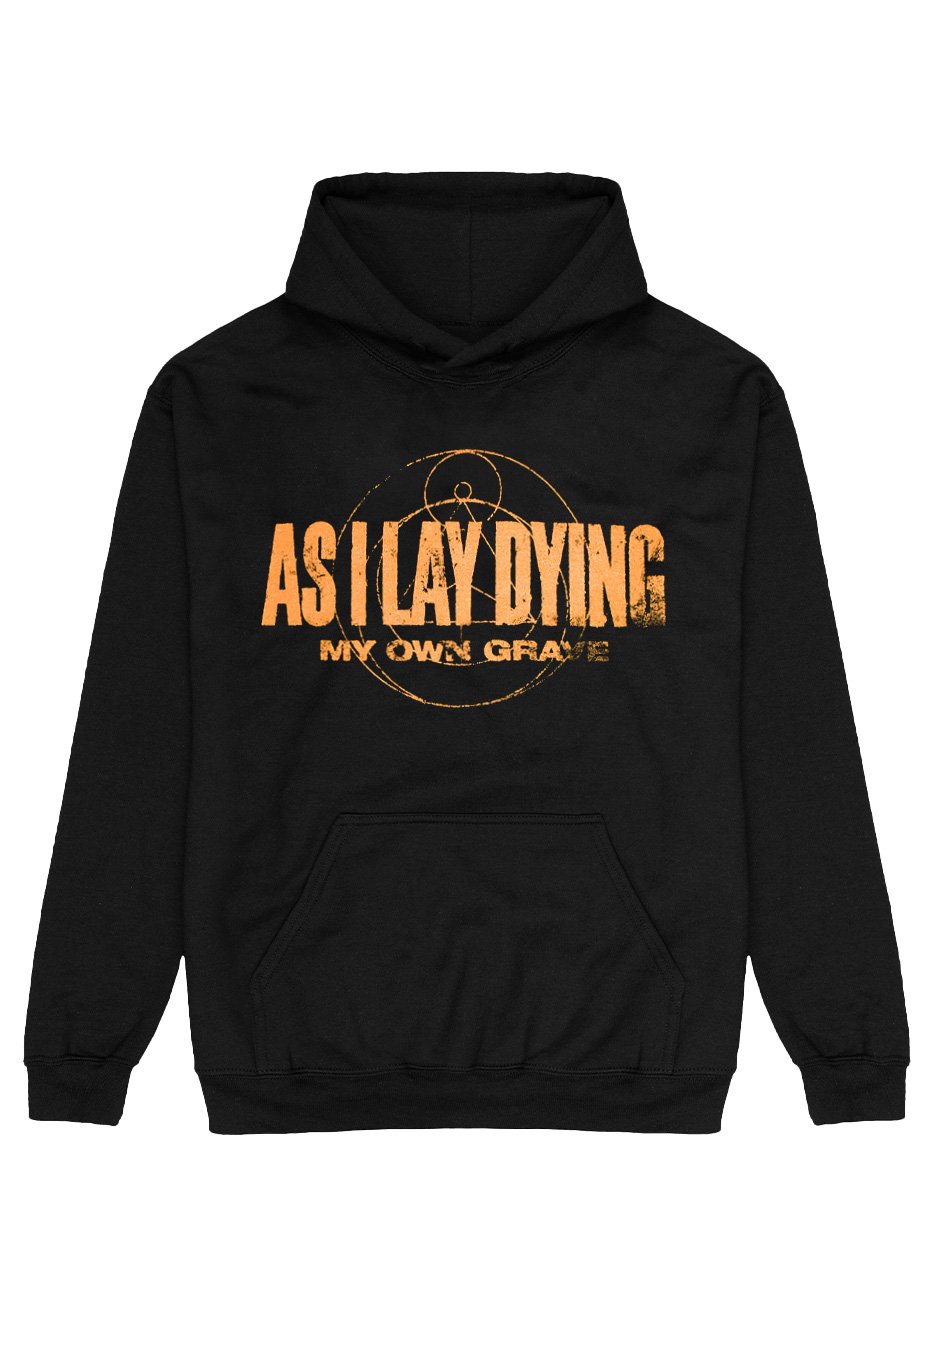 As I Lay Dying - MOG Snake - Hoodie